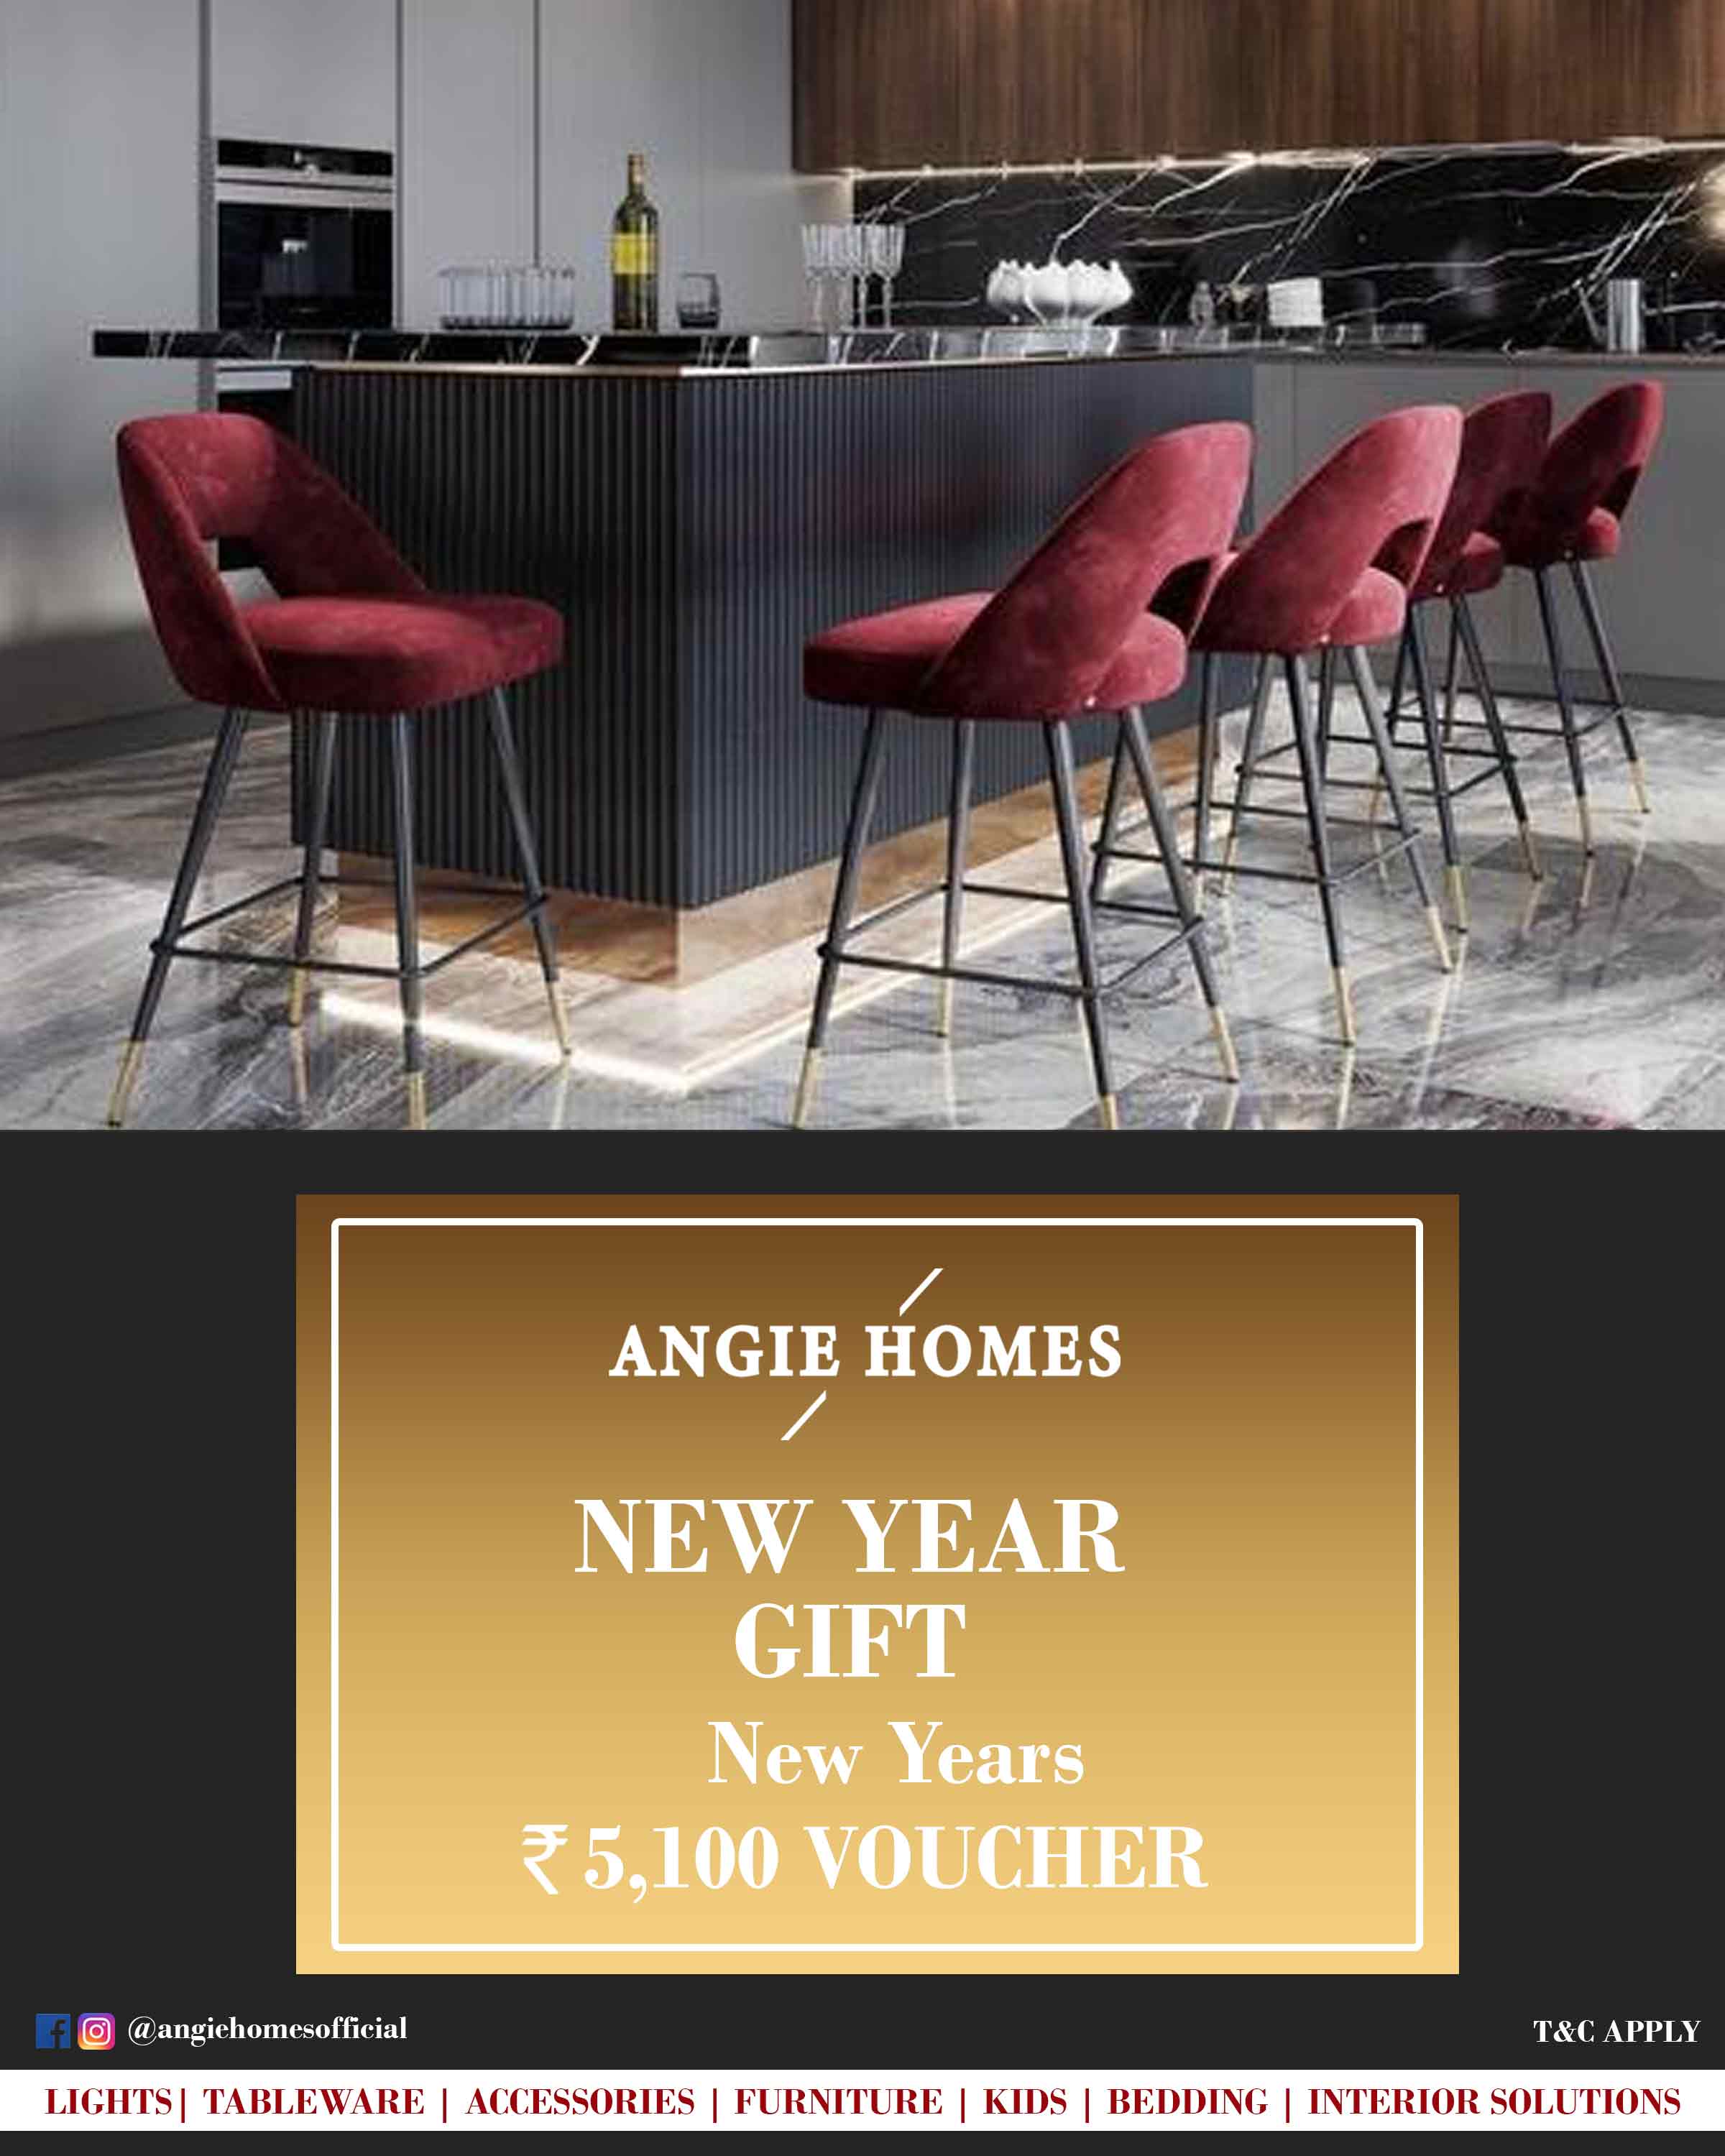 Online New Year Gift Card Voucher for Stylish Bar Chair Set | Furniture ANGIE HOMES